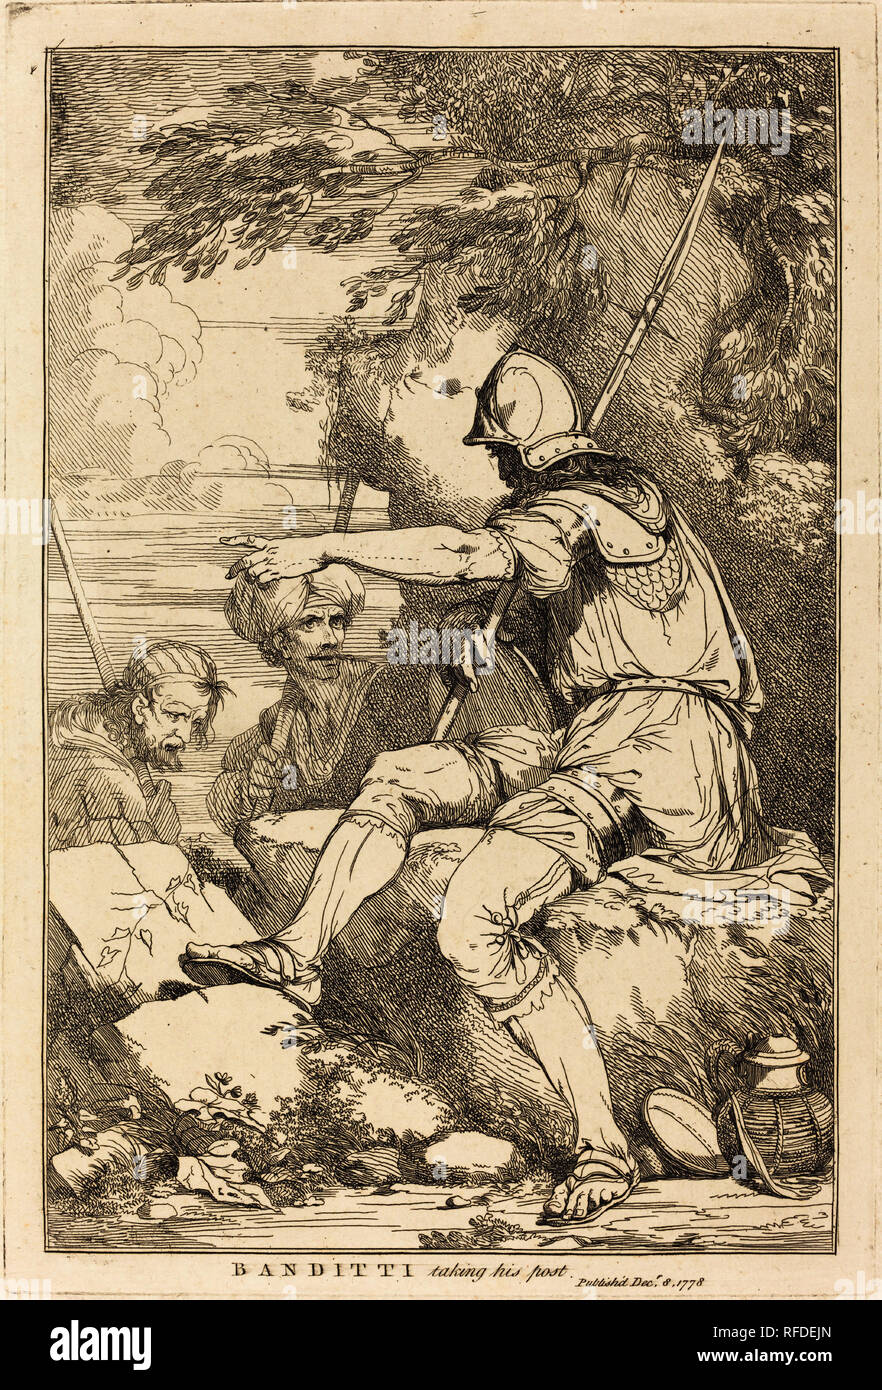 Banditti Taking His Post. Dated: 1778. Dimensions: plate: 30 × 20.1 cm (11 13/16 × 7 15/16 in.)  sheet: 42.4 × 29 cm (16 11/16 × 11 7/16 in.). Medium: etching. Museum: National Gallery of Art, Washington DC. Author: John Hamilton Mortimer. Stock Photo